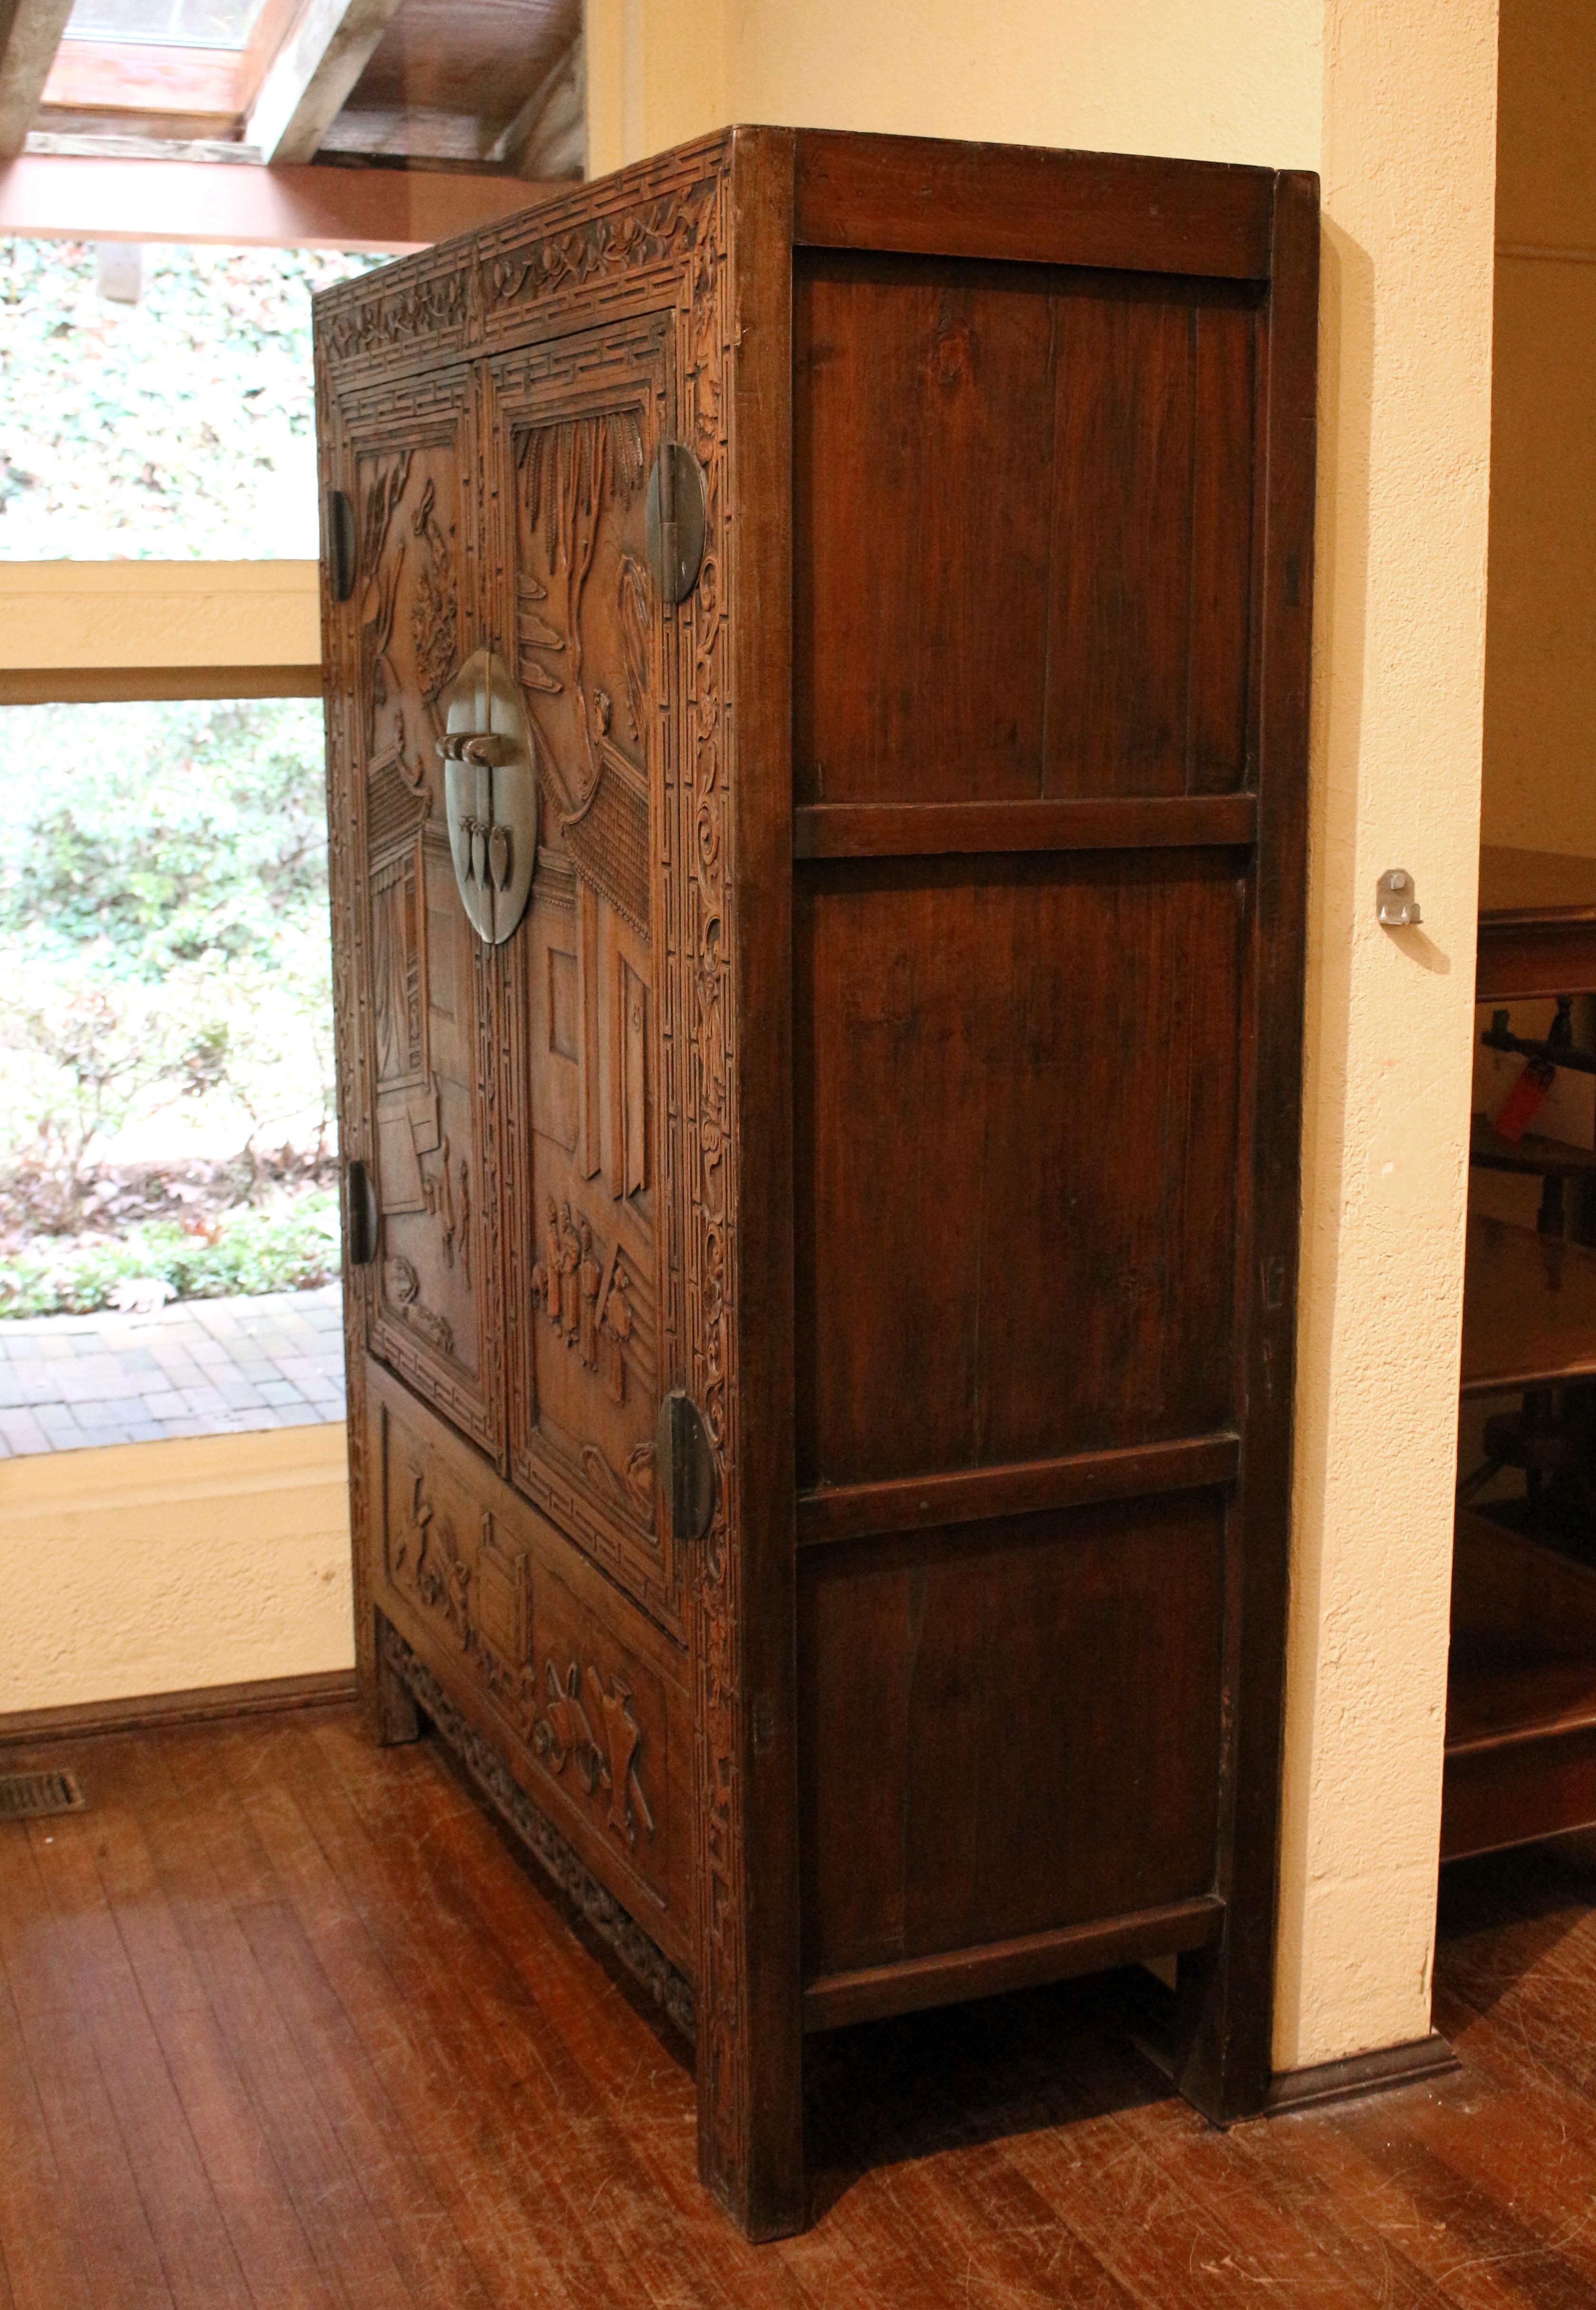 Circa 1880 Chinese carved wardrobe cabinet, Qing dynasty. Red stain on panelled sides. Extensively carved front. Perhaps for a marriage gift. Note the mythical figures on the roof and what seem to be gifts in the bottom frieze and in the arms of the